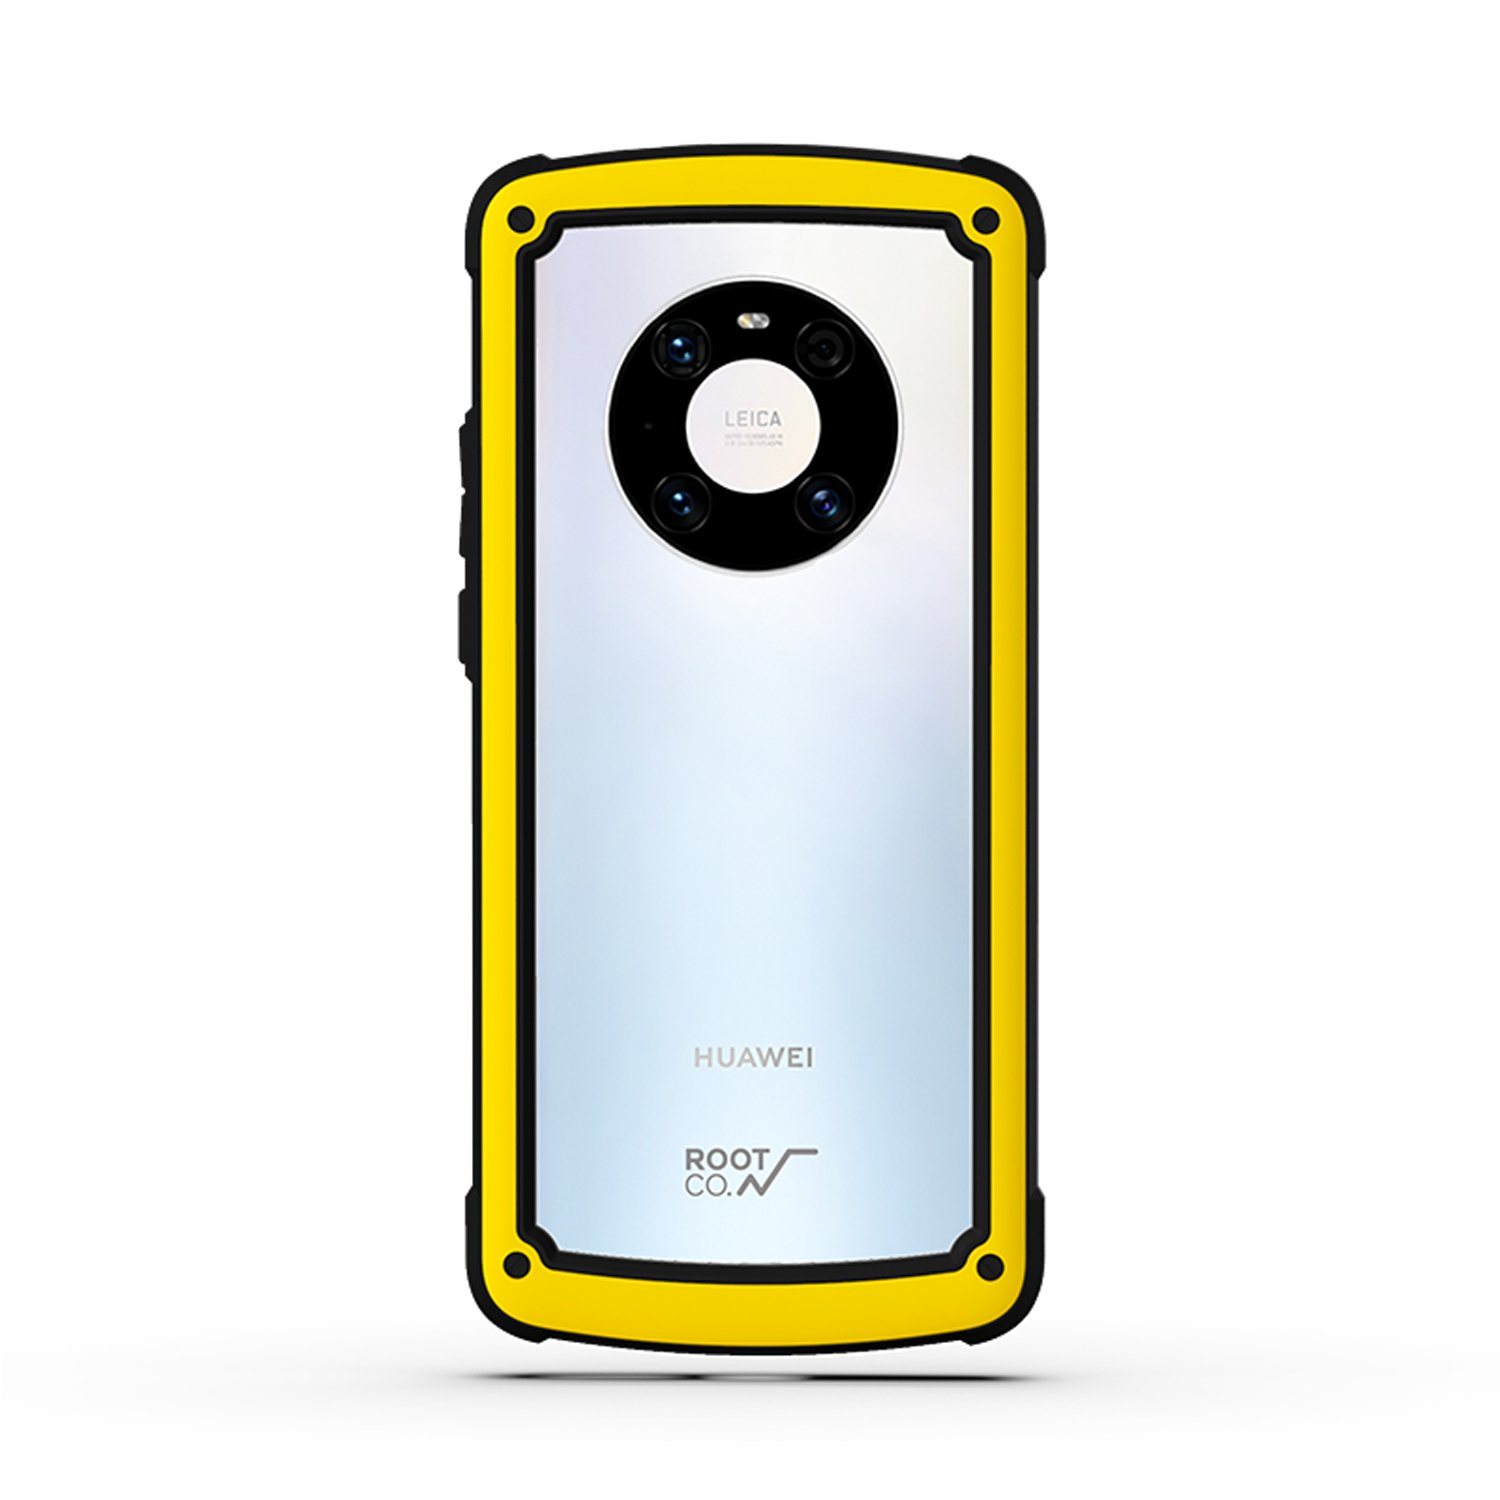 ROOT CO. Gravity Shock Resist Tough & Basic Case for Huawei Mate 40 Pro, Yellow Default ROOT CO. 